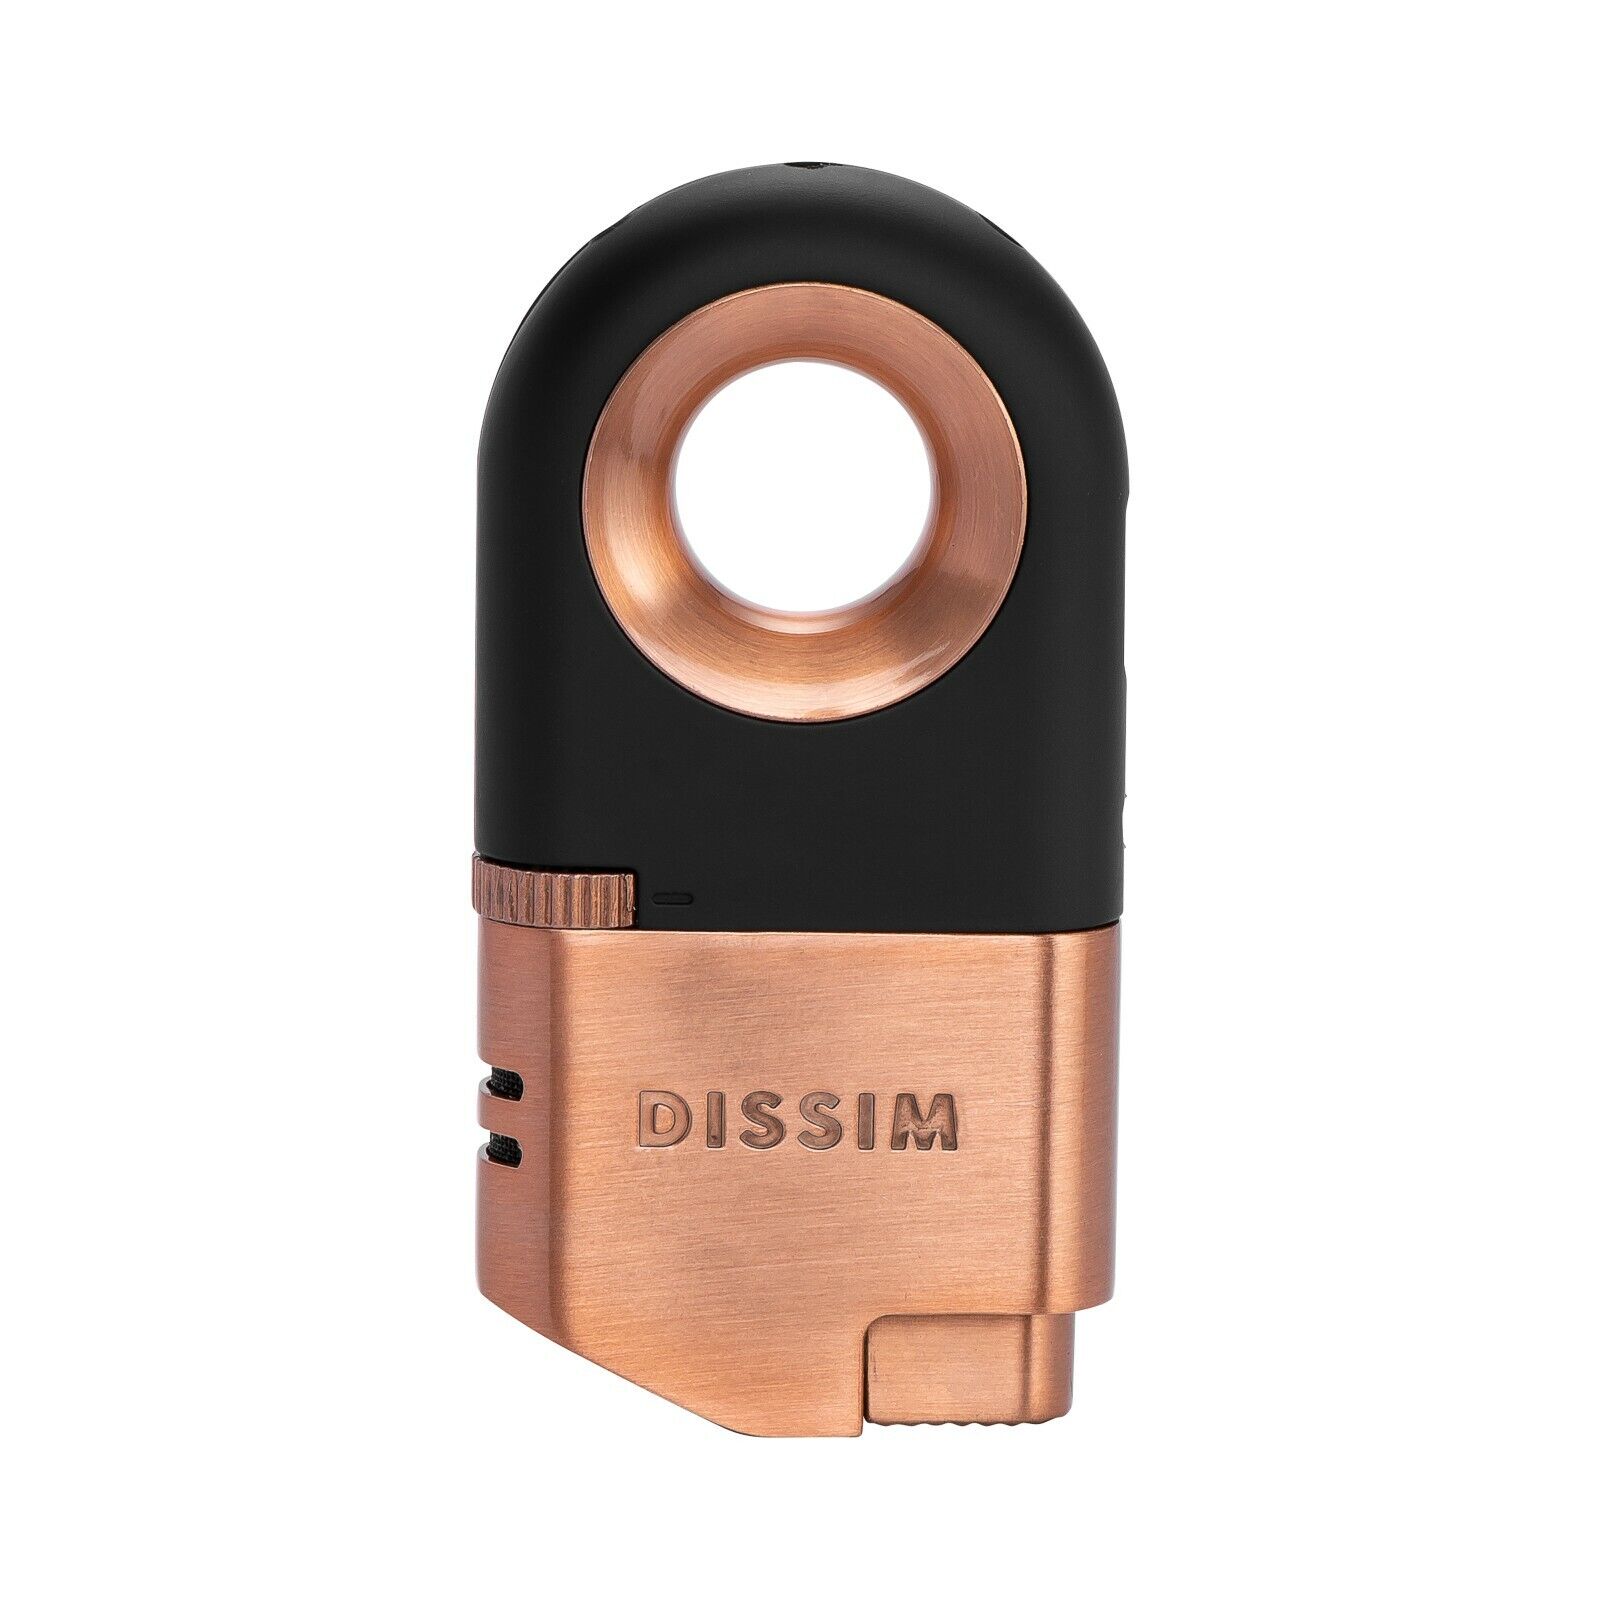 DISSIM World's First Inverted Lighter, Dual Torch, Light up or down, Rose Gold